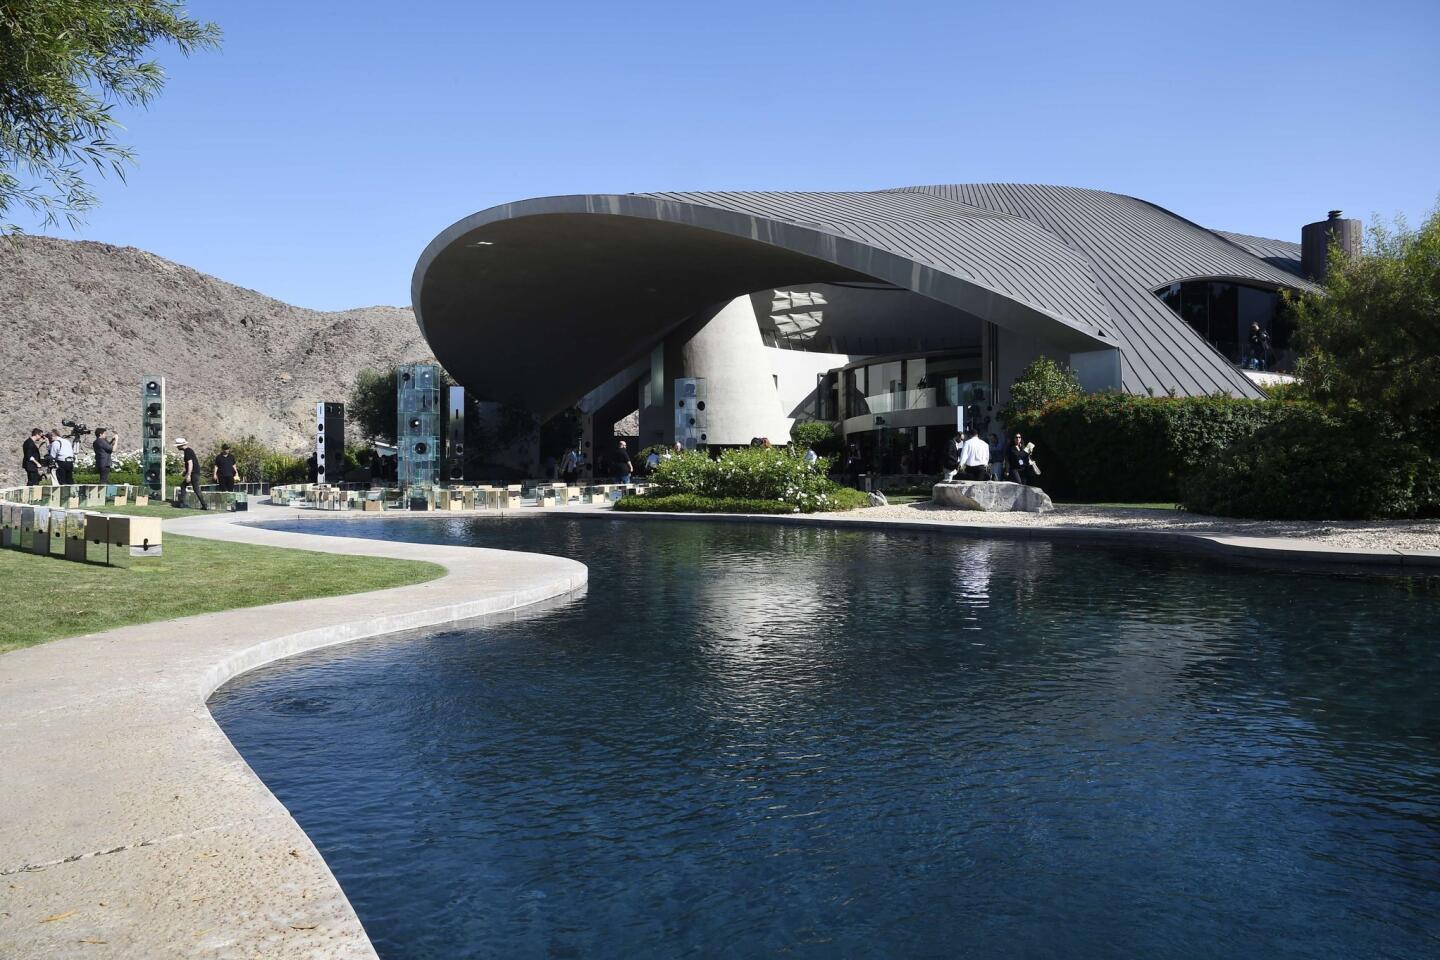 Palm Springs basking in buzz from Louis Vuitton show